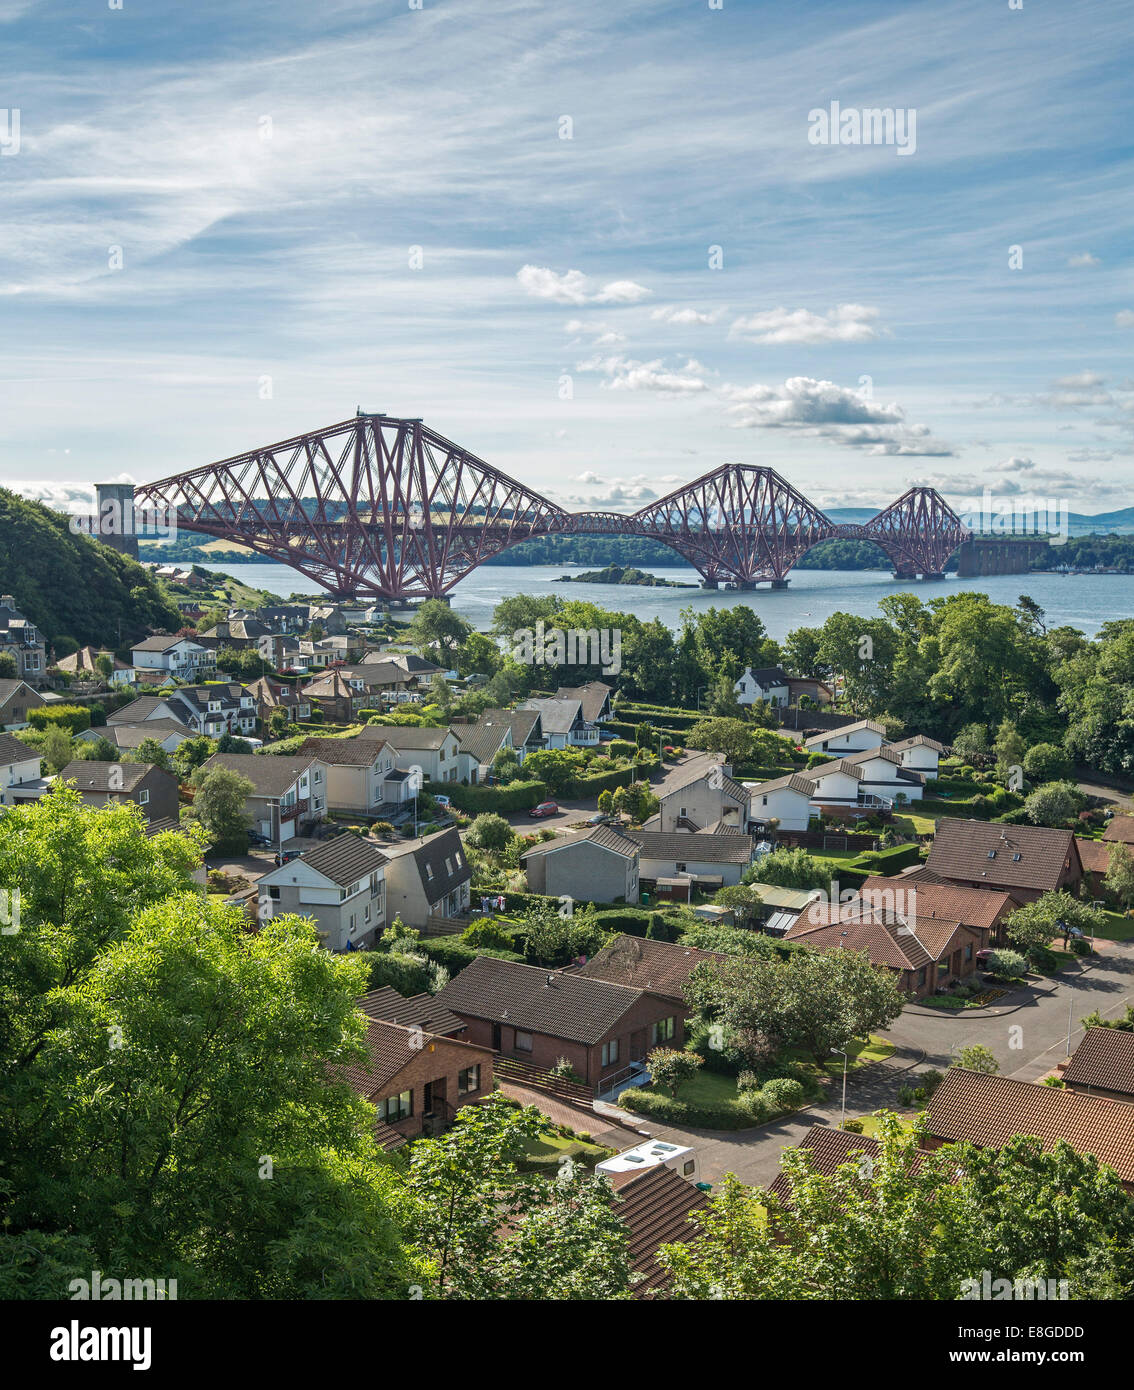 Iconic 19th century cantilever bridge over Firth of Forth with houses of riverbank town of Queenstown in foreground Scotland Stock Photo